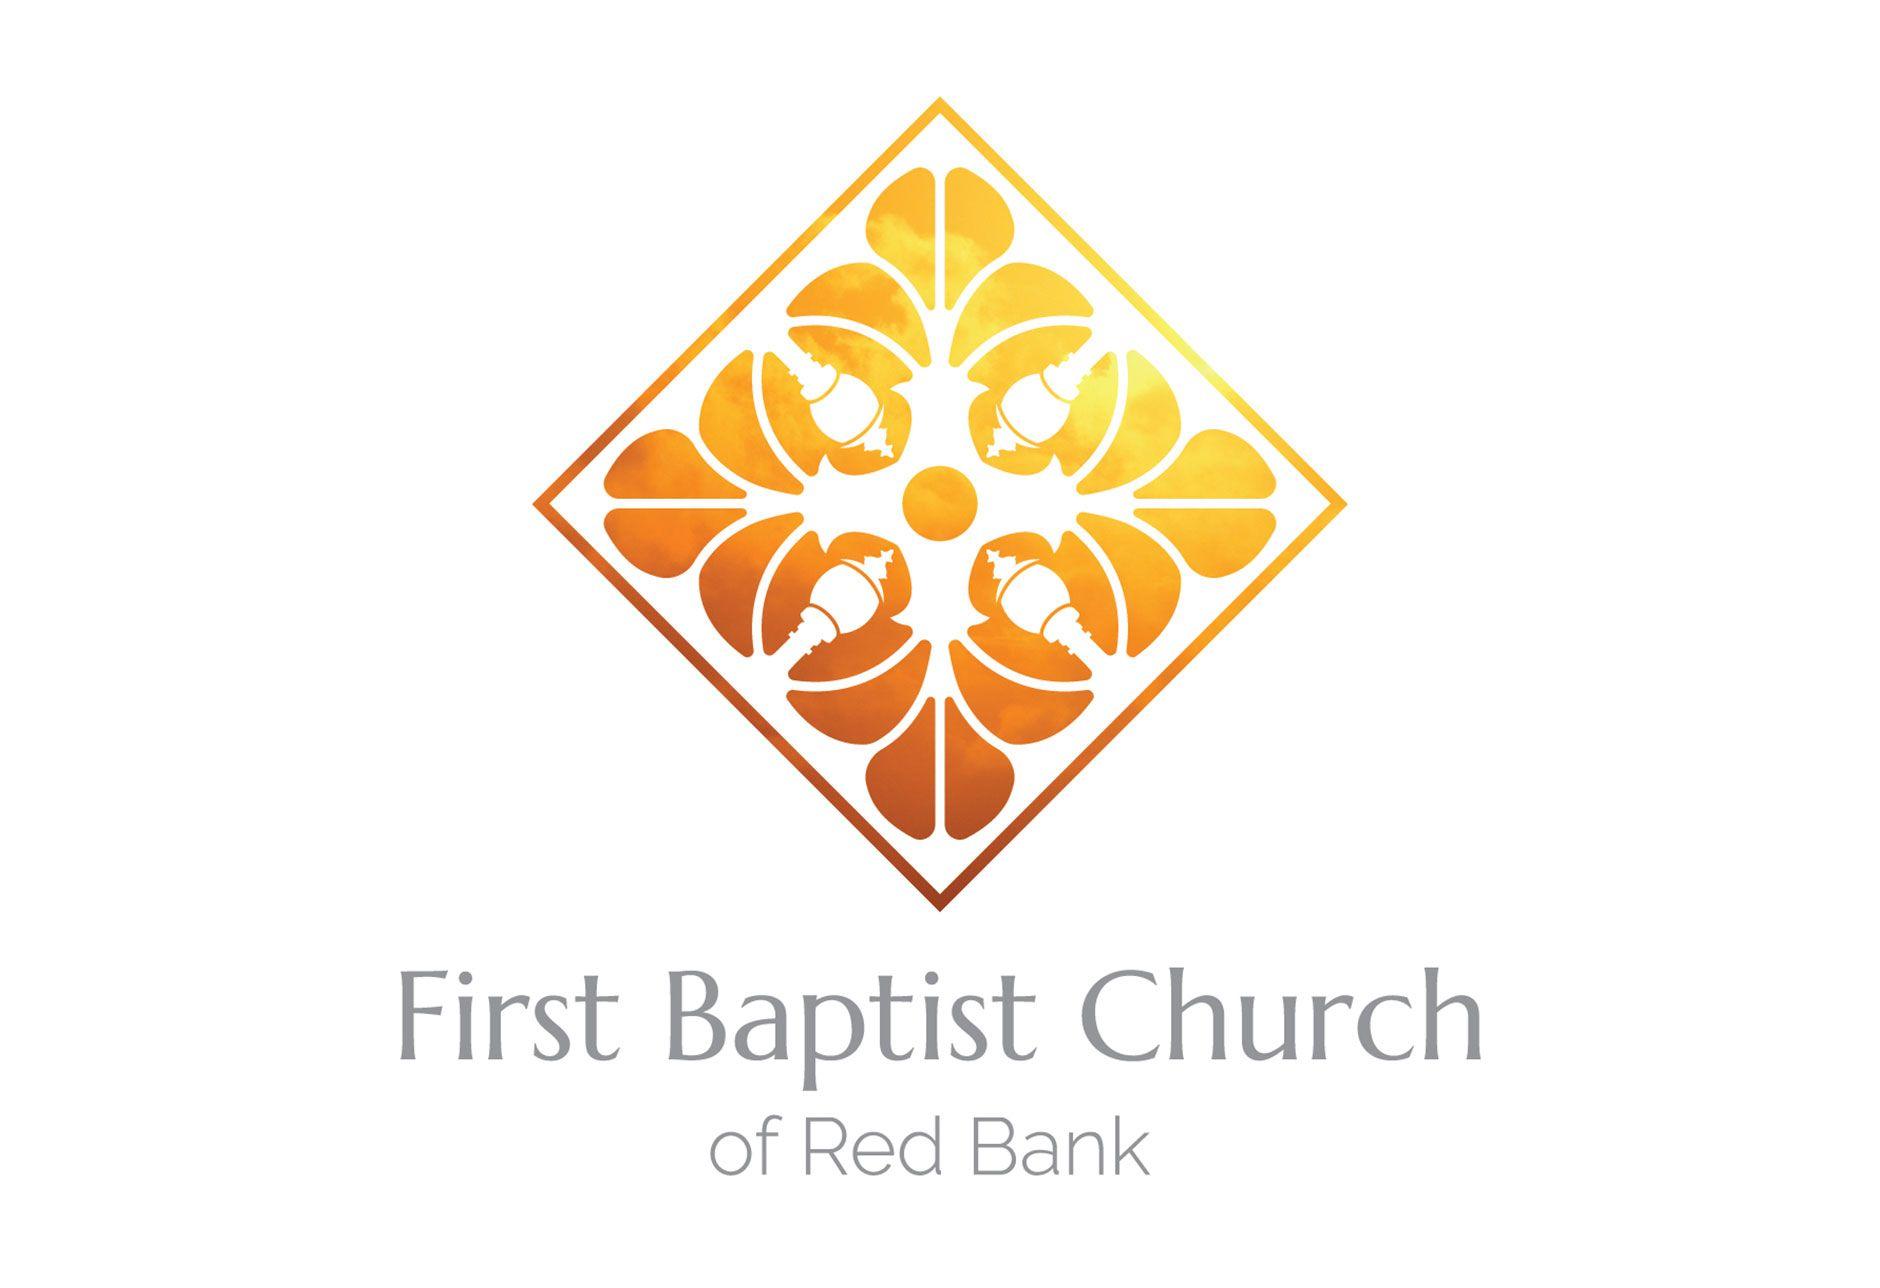 Red Bank Logo - First Baptist Church of Red Bank